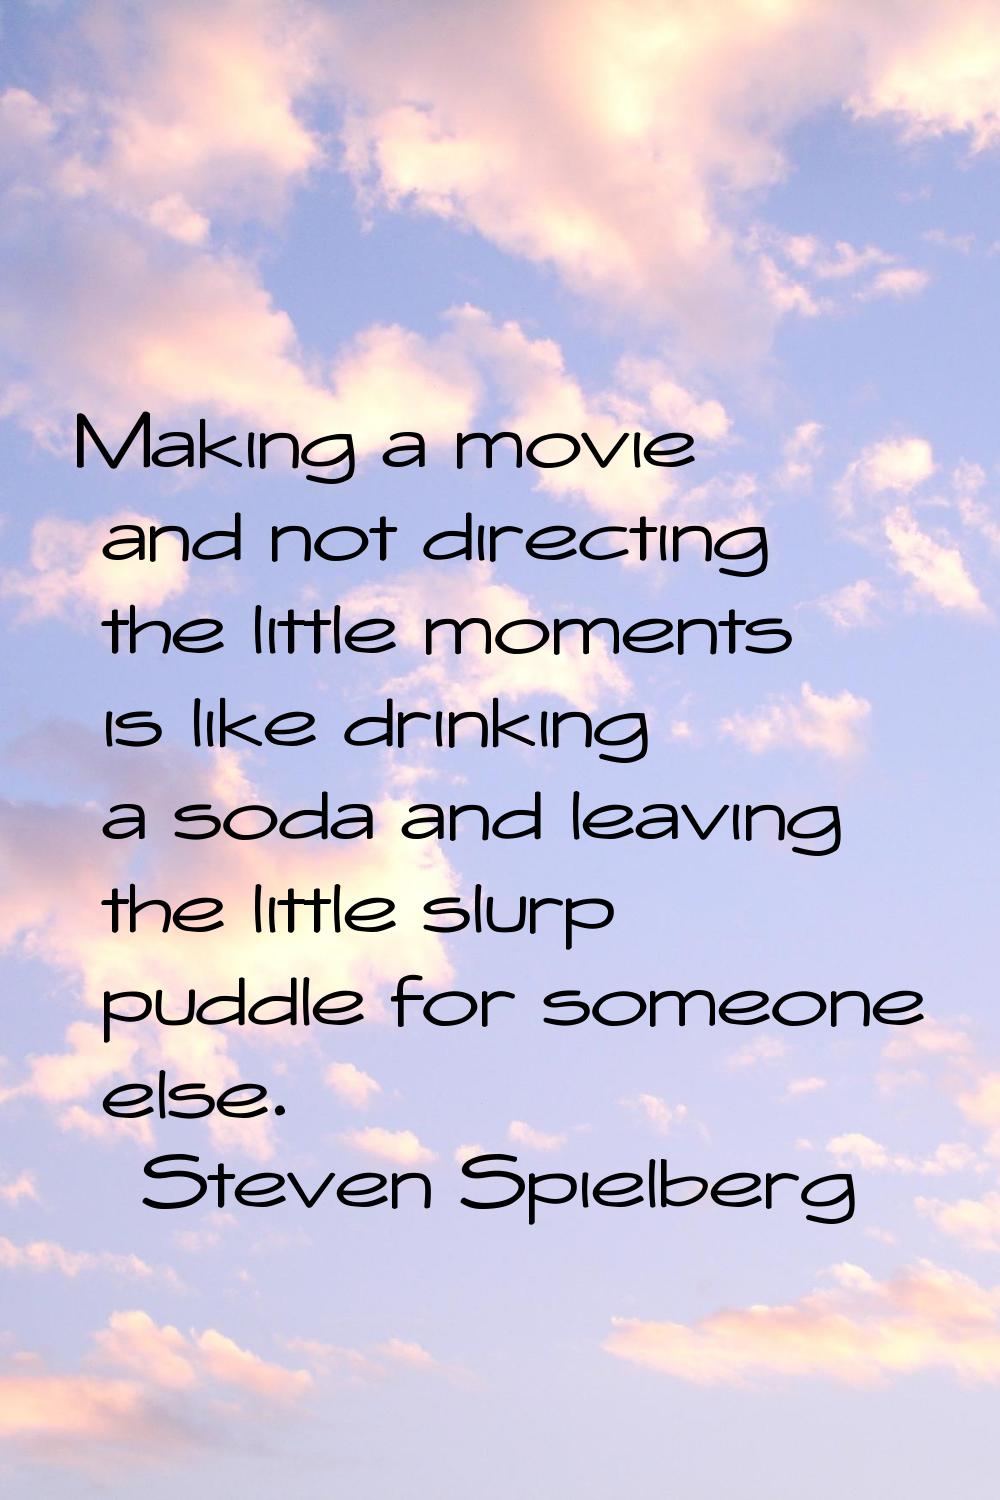 Making a movie and not directing the little moments is like drinking a soda and leaving the little 